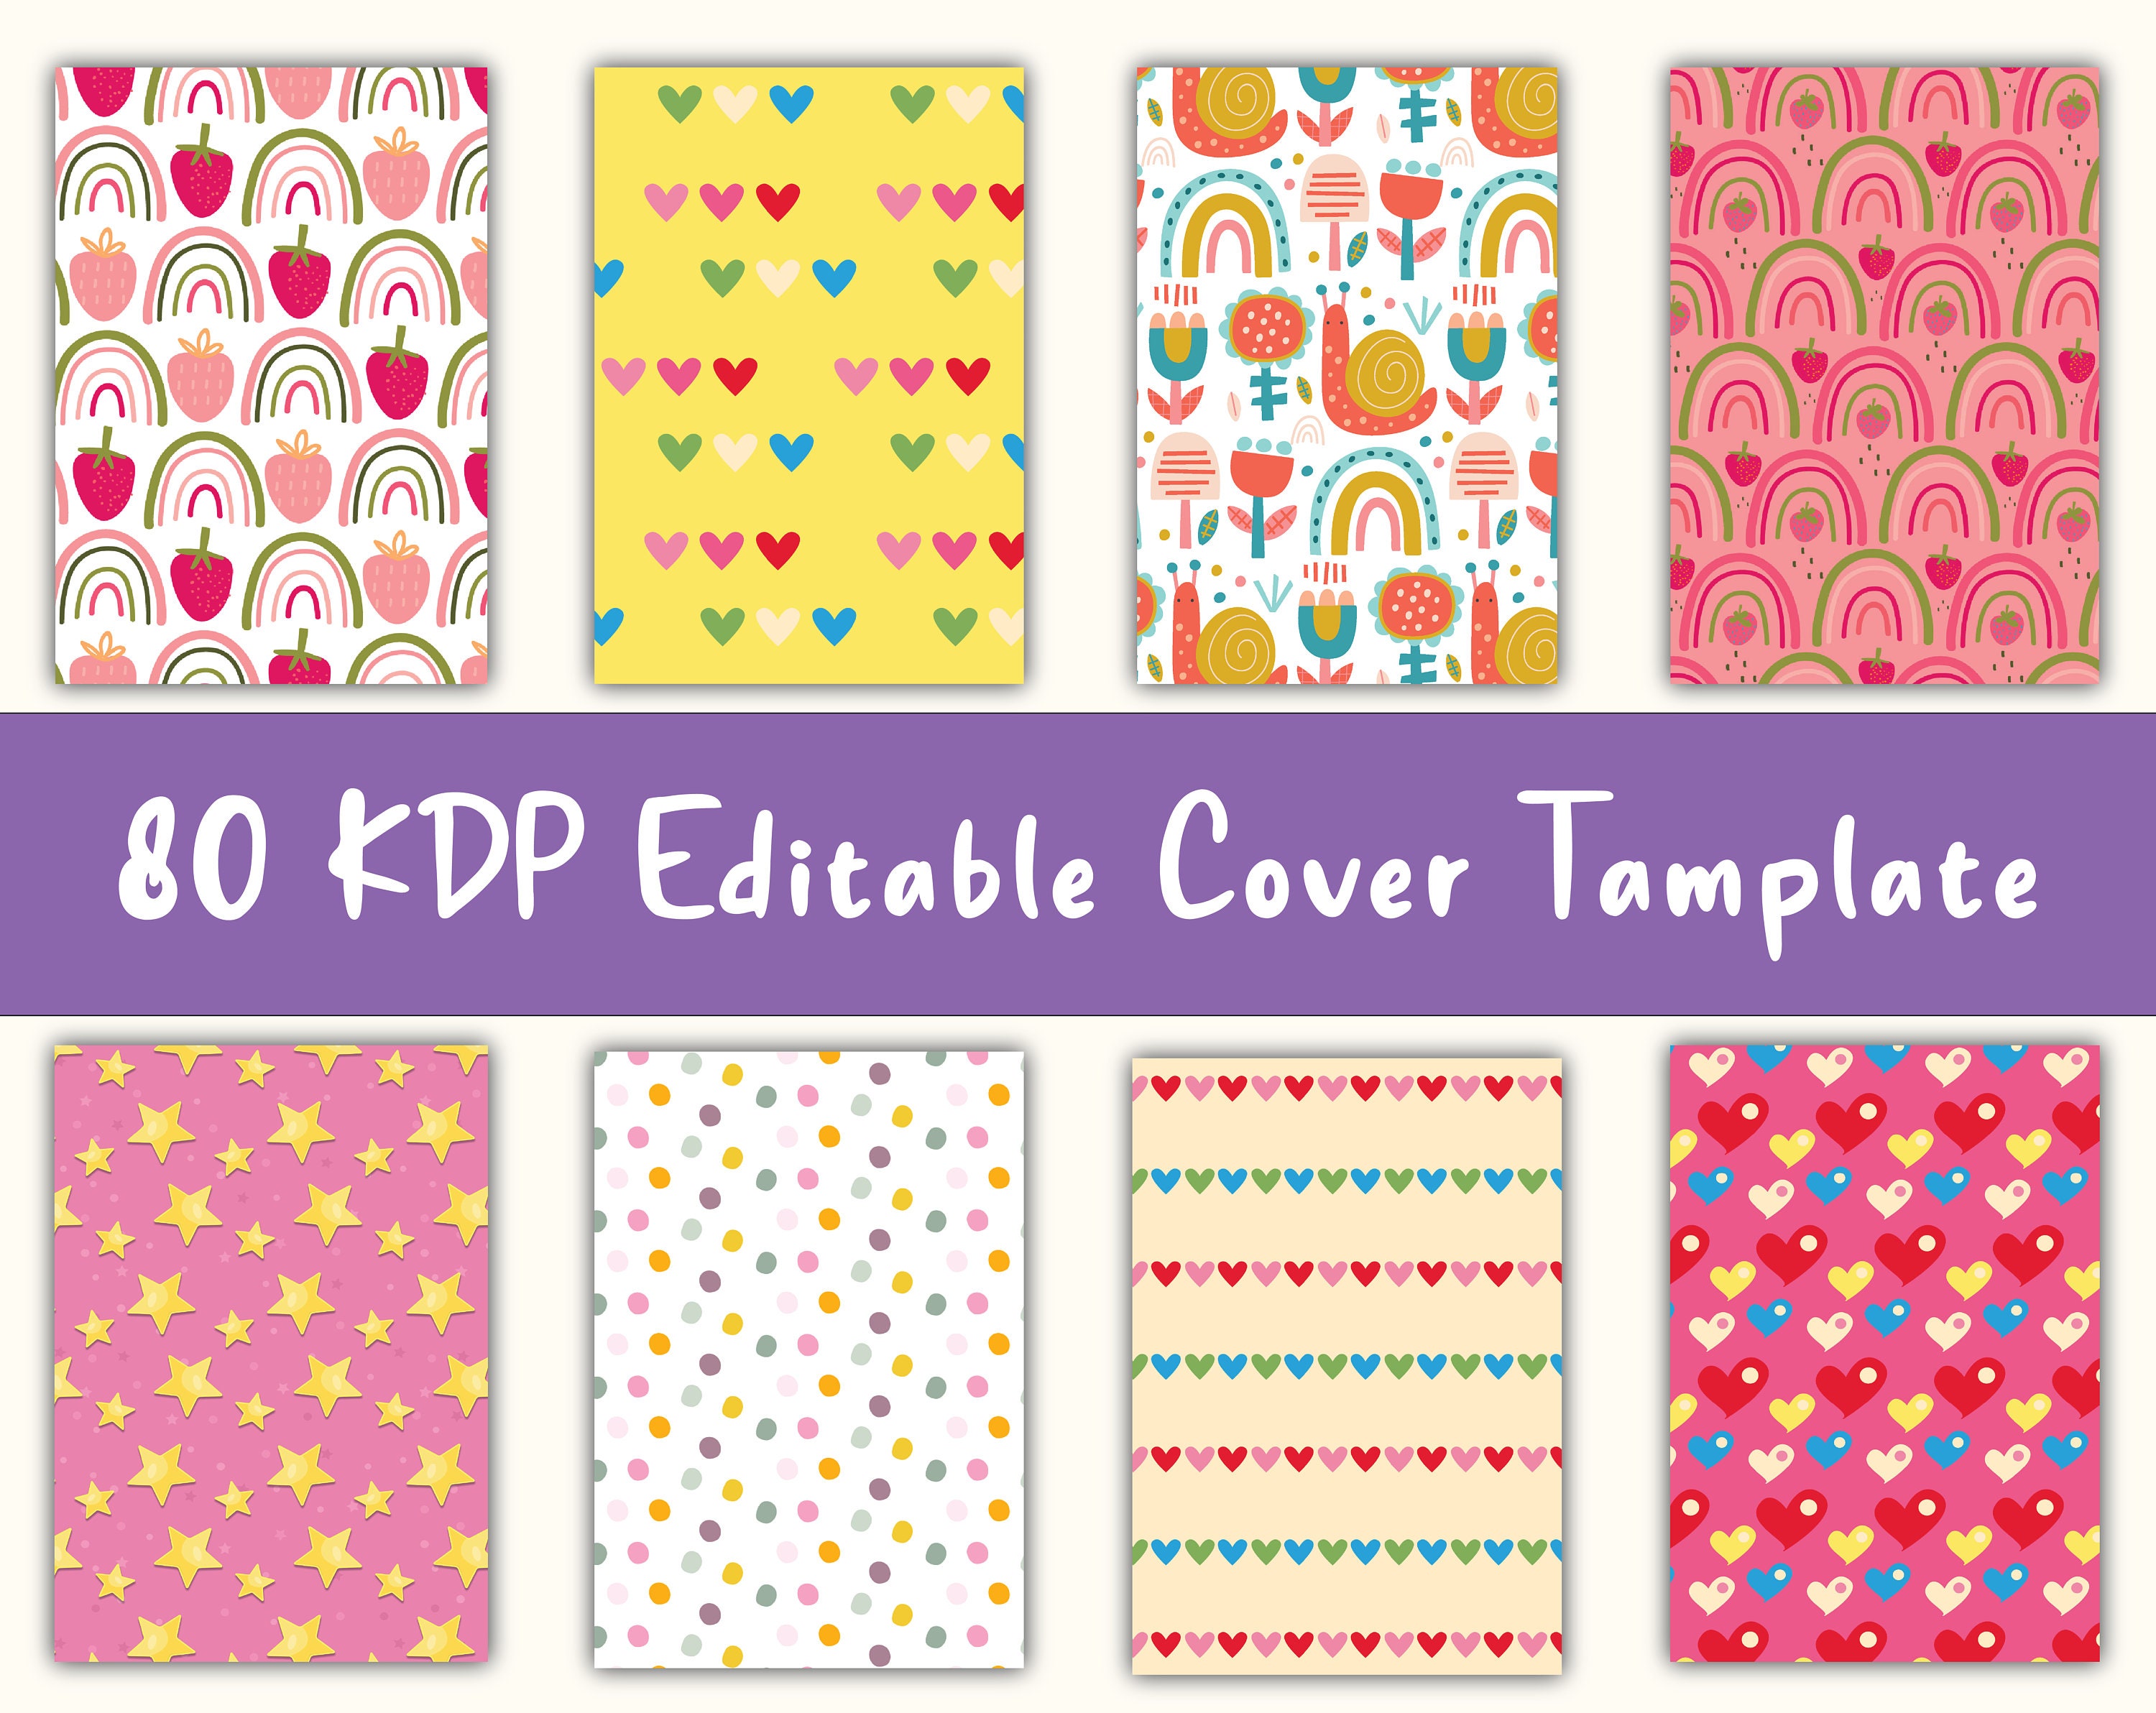 80-kdp-cover-tamplate-canva-editable-kdp-book-covers-journal-and